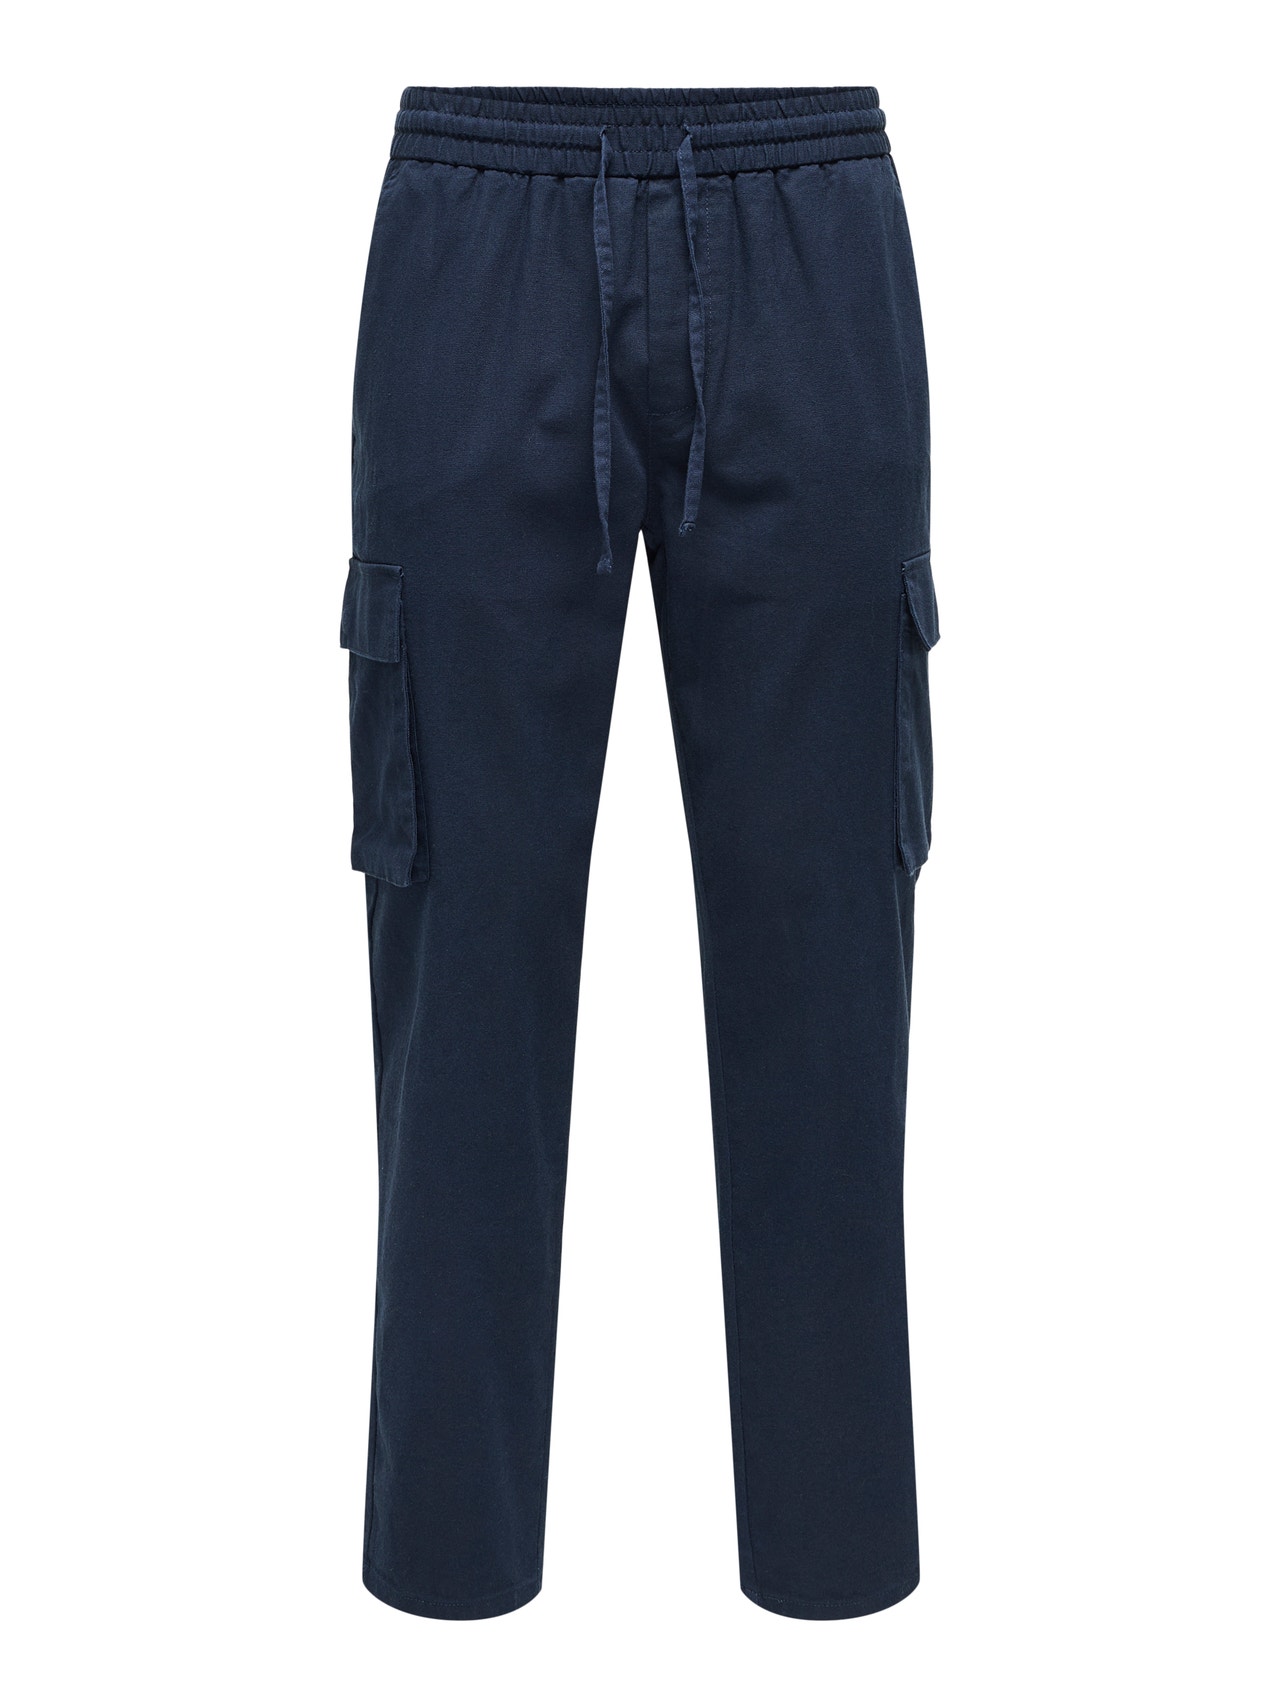 ONLY & SONS Tapered Fit Trousers -Dark Navy - 22028268